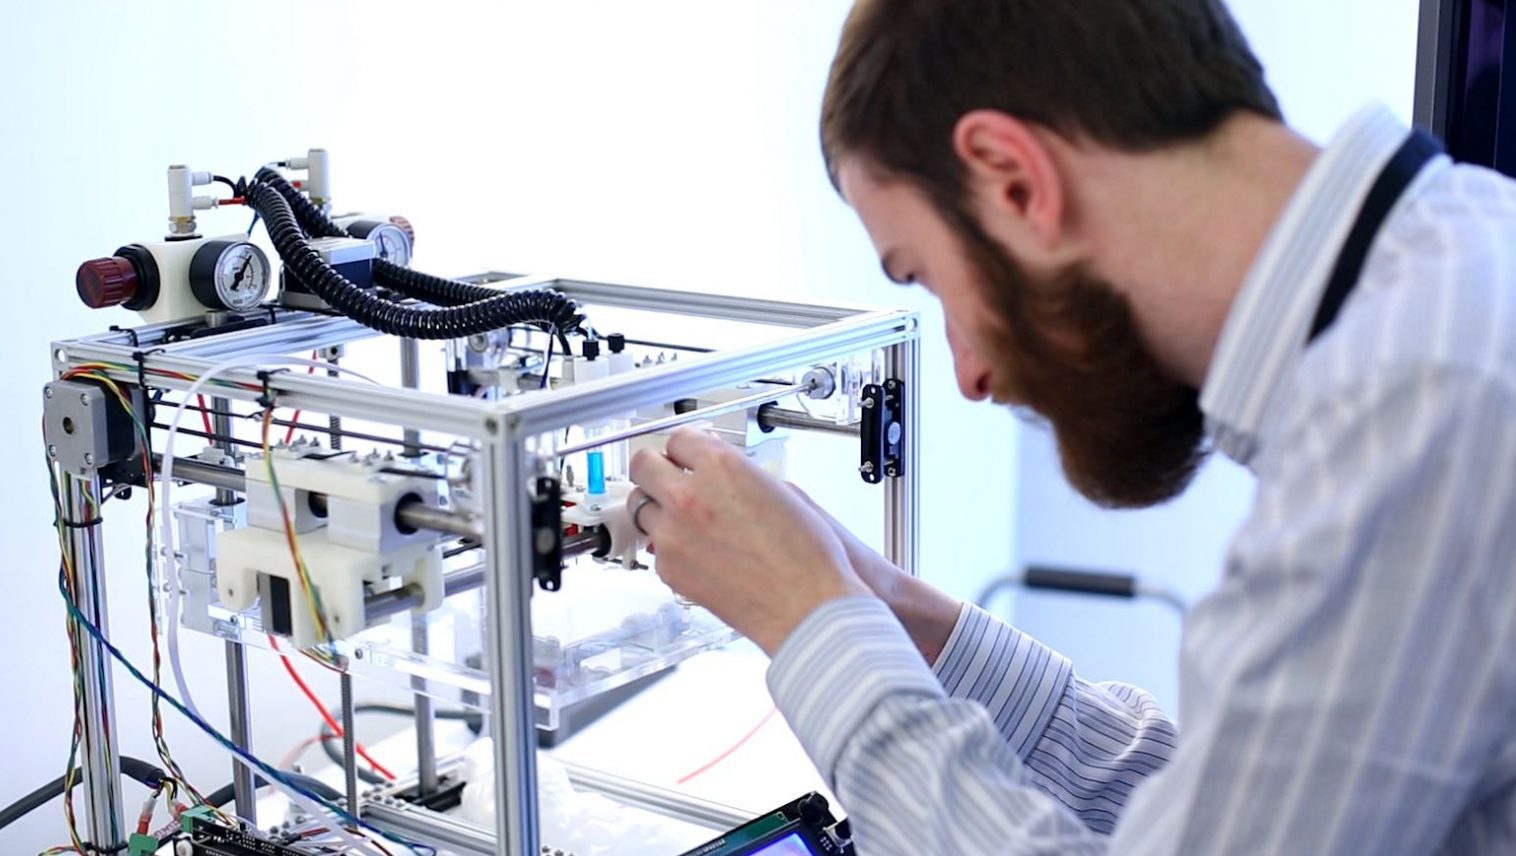 Find Out How 3D Printing Is Revolutionizing Medical Surgery